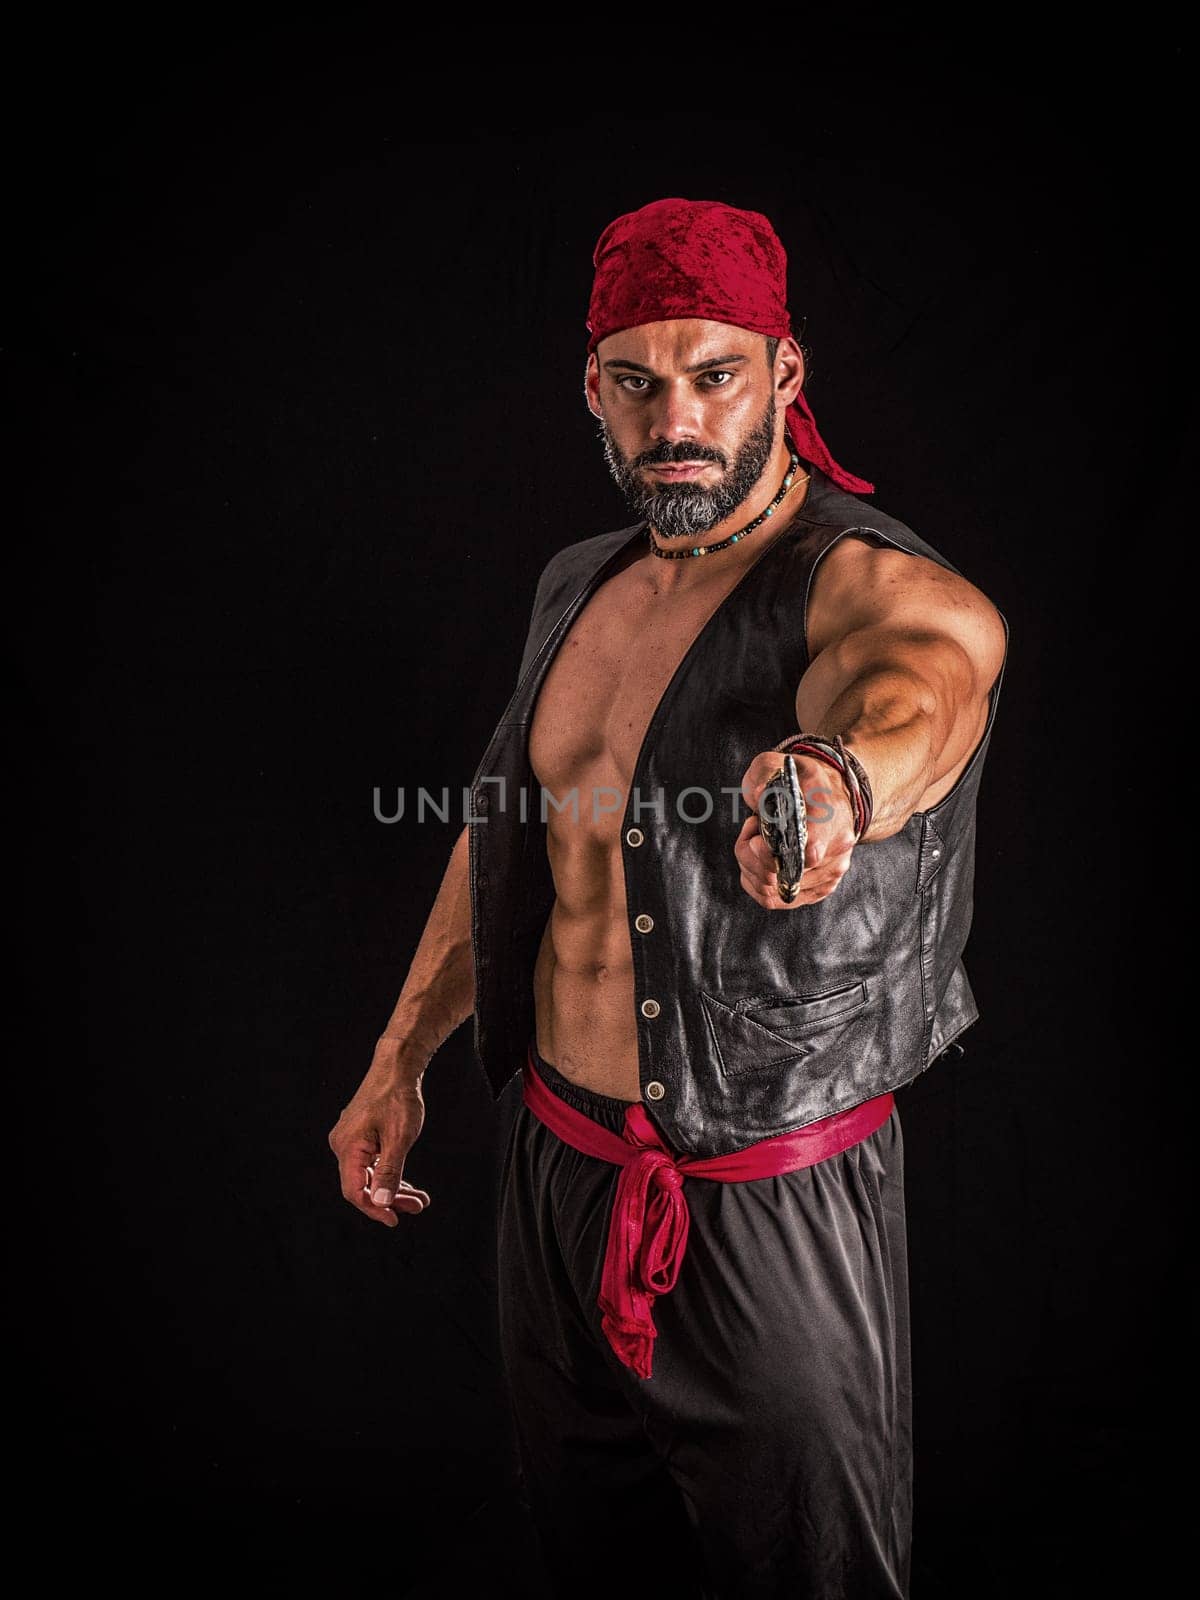 The Pirate, A Male Bodybuilder with a Red Bandanna Standing Proudly Before a Black Canvas by artofphoto